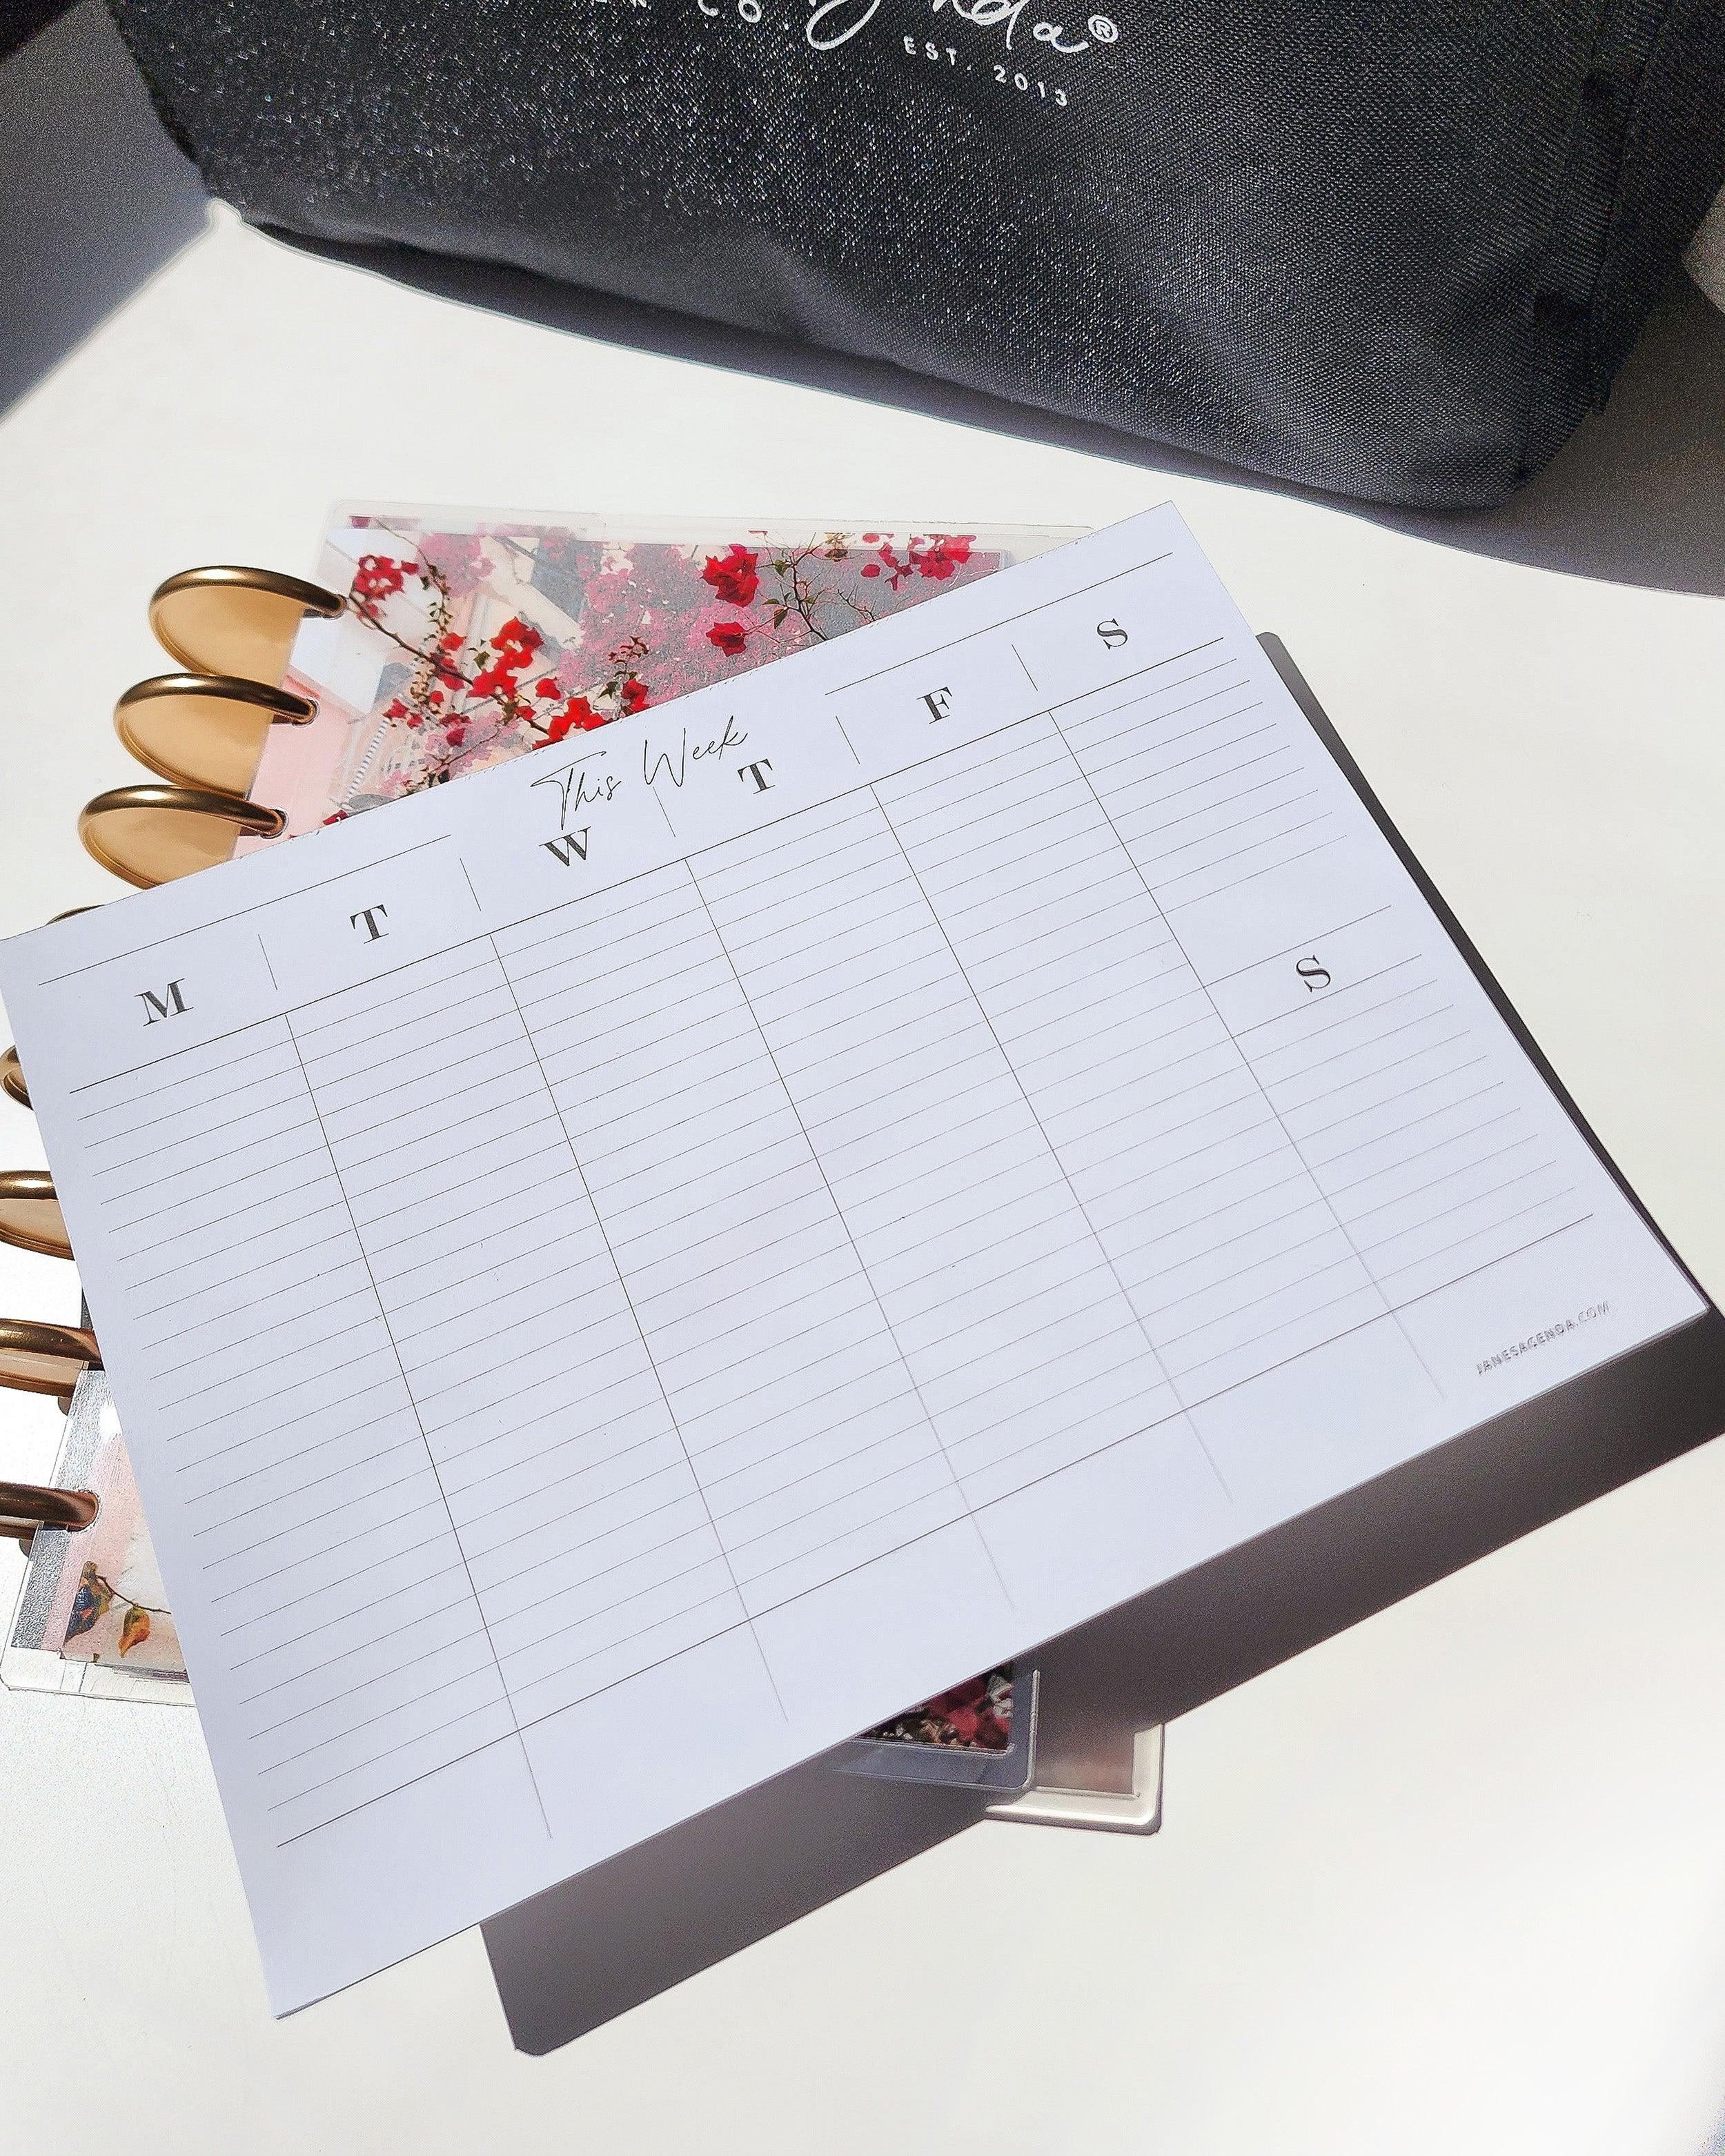 Weekly calendar desk pad for notes, tasks, and scheduling by Janes Agenda.